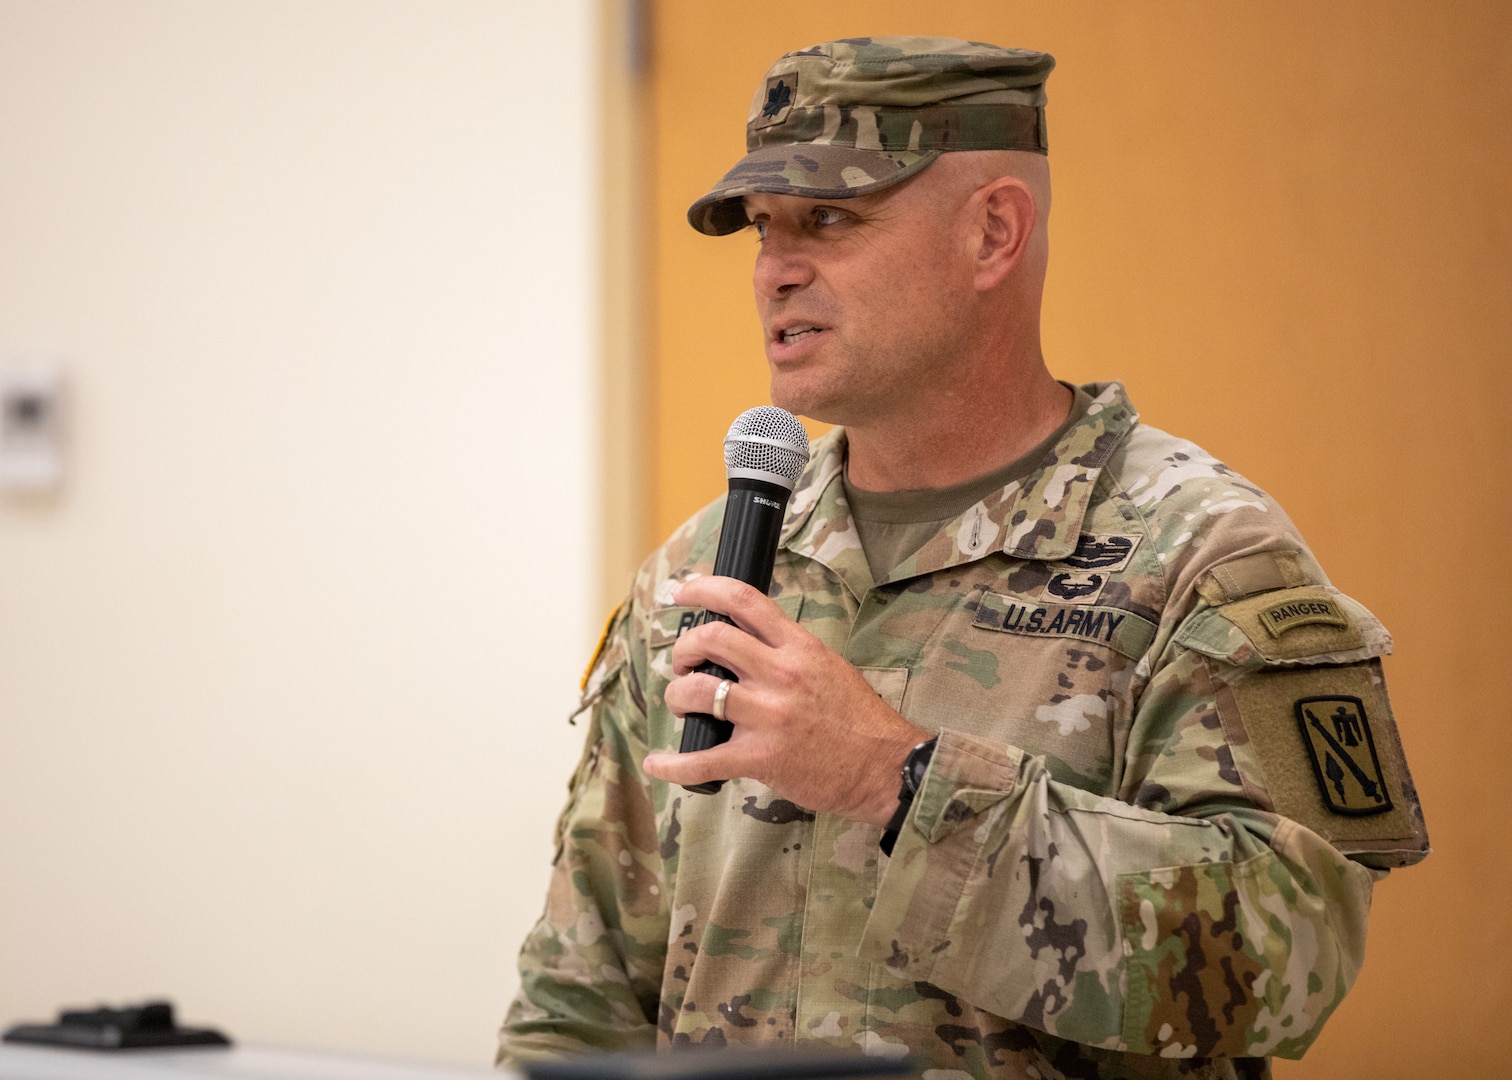 Lt. Col. William Kale Rogers, incoming commander of the 45th Field Artillery Brigade, Oklahoma Army National Guard, speaks during a change of command ceremony held at the Mustang Armed Forces Reserve Center in Mustang, Oklahoma, on June 15, 2024. The changing of command signifies the transfer of responsibility from outgoing commander Col. Johnnie Dale Moss, to incoming commander, Rogers. (Oklahoma National Guard photo by Pfc. Brooklyn Clark)